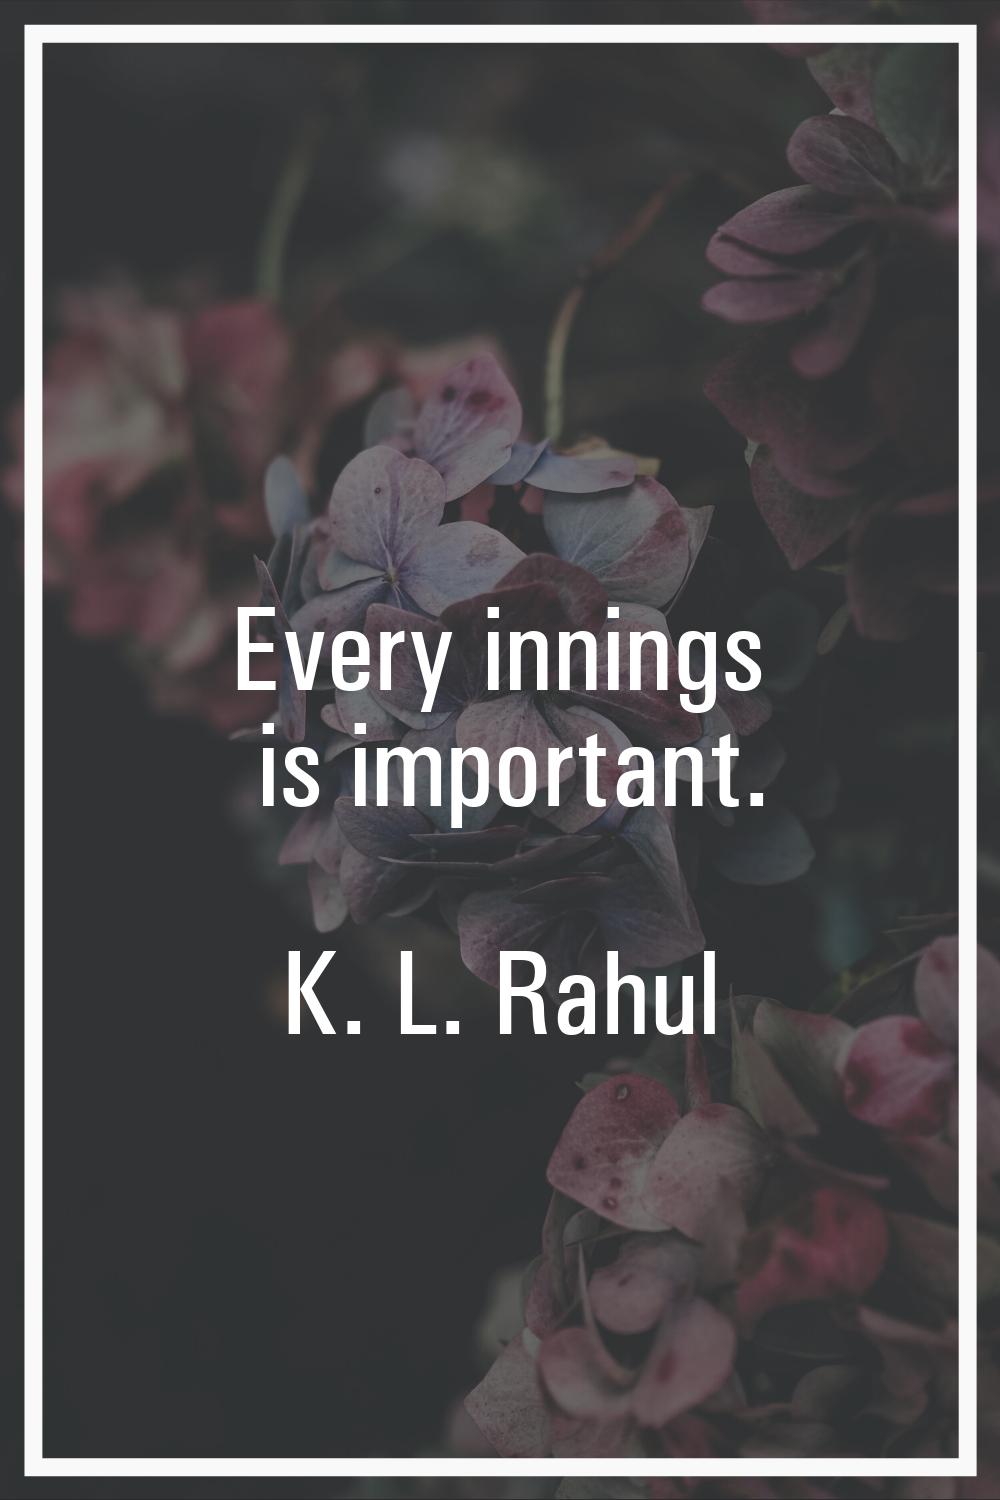 Every innings is important.